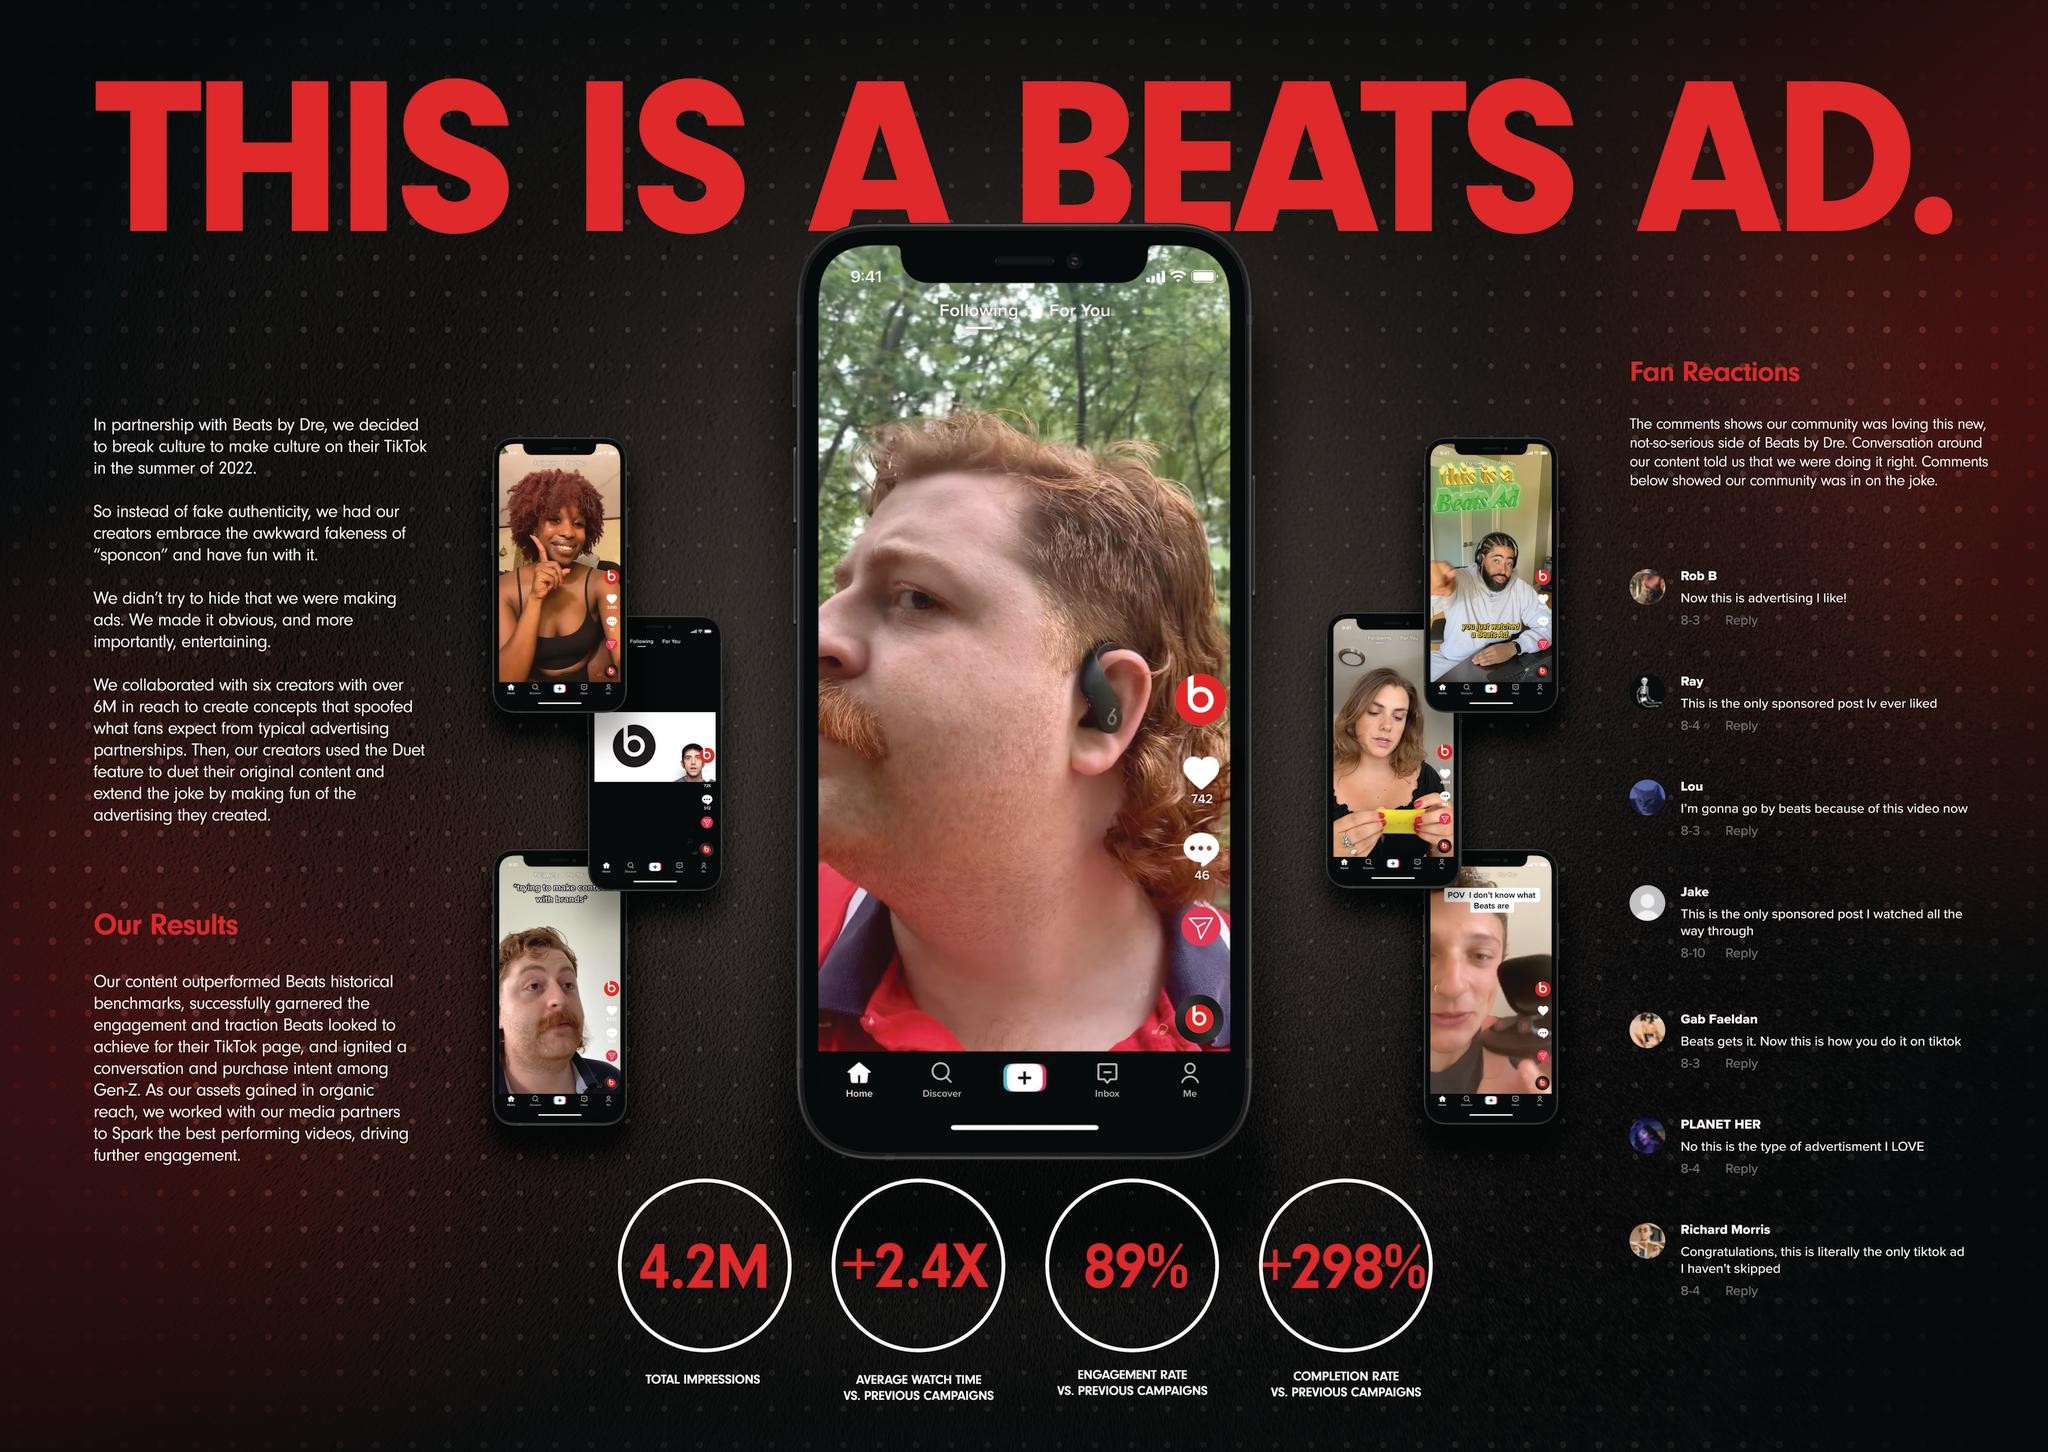 THIS IS A BEATS AD